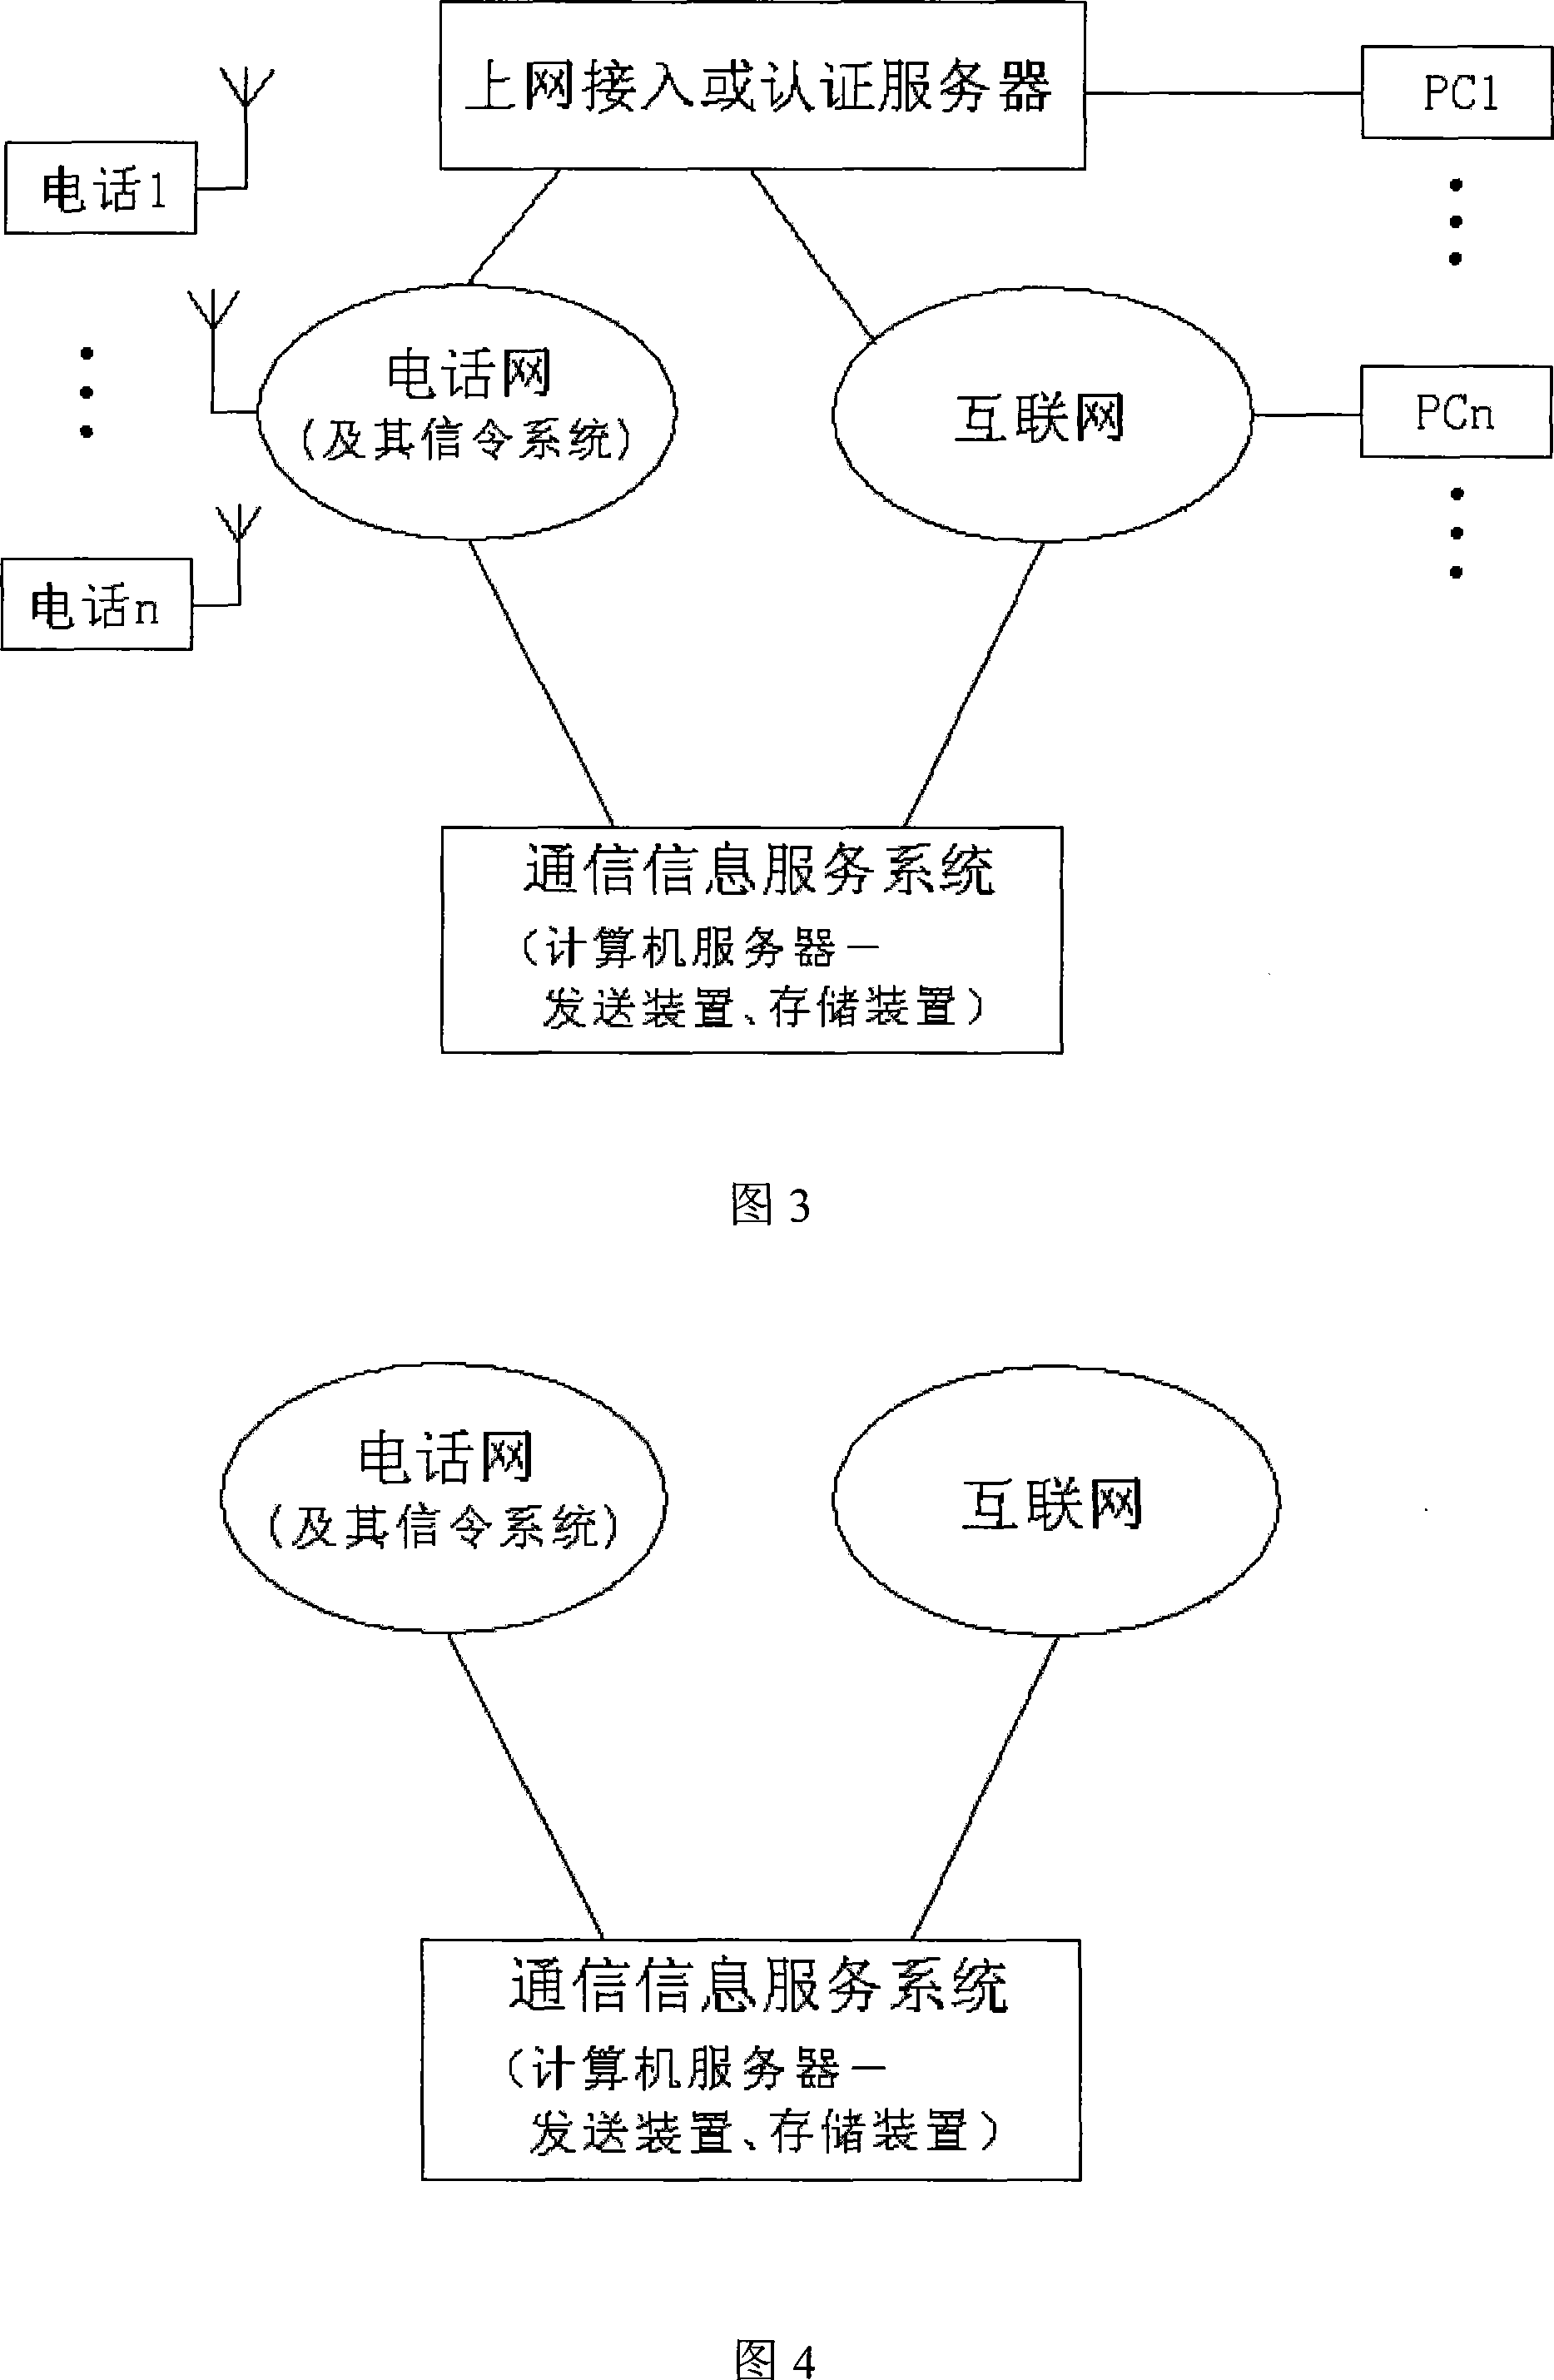 Method and system for providing telephone network communication information to computer on Internet